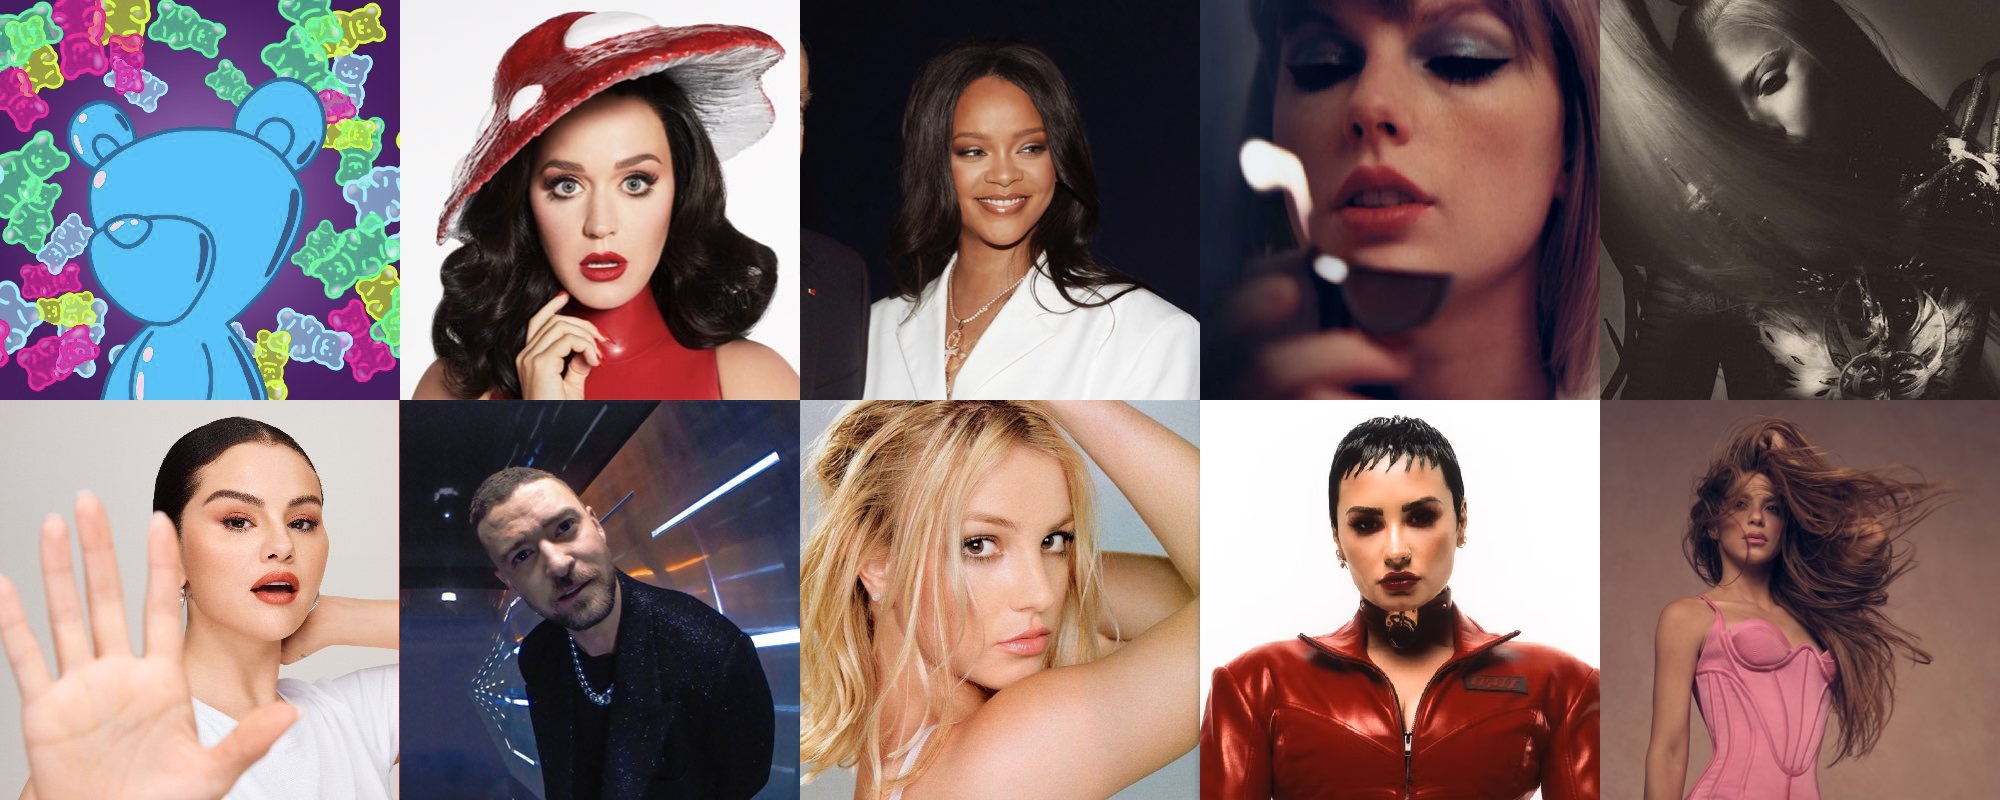 Top 10 most-followed music artists on Twitter in 2022